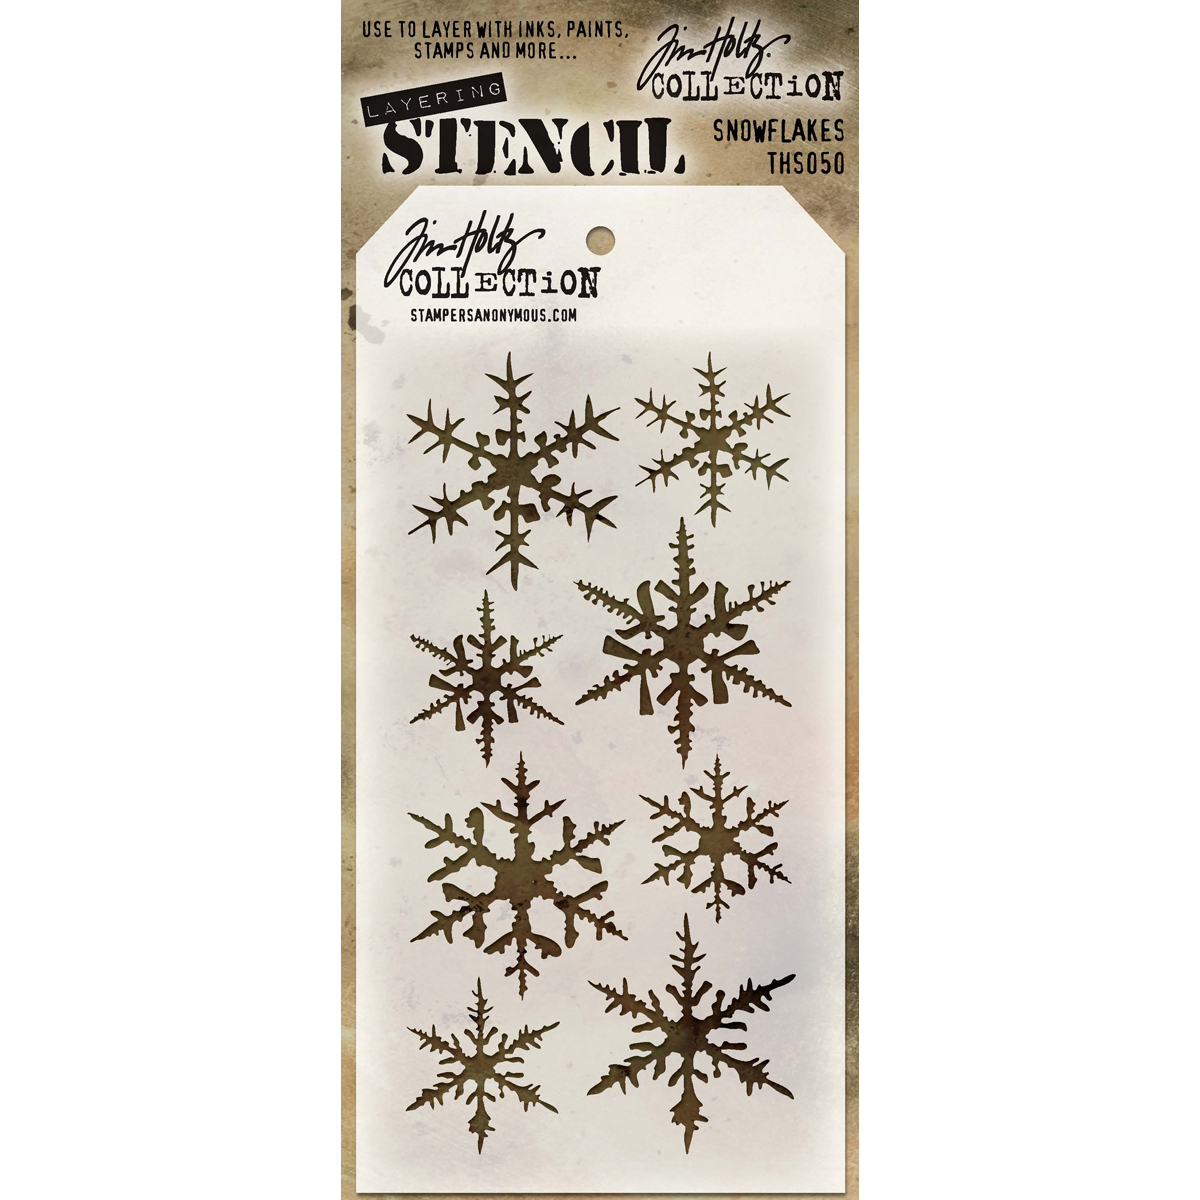 Tim Holtz Layered Stencil 4.125"X8.5"-Snowflakes - image 1 of 3